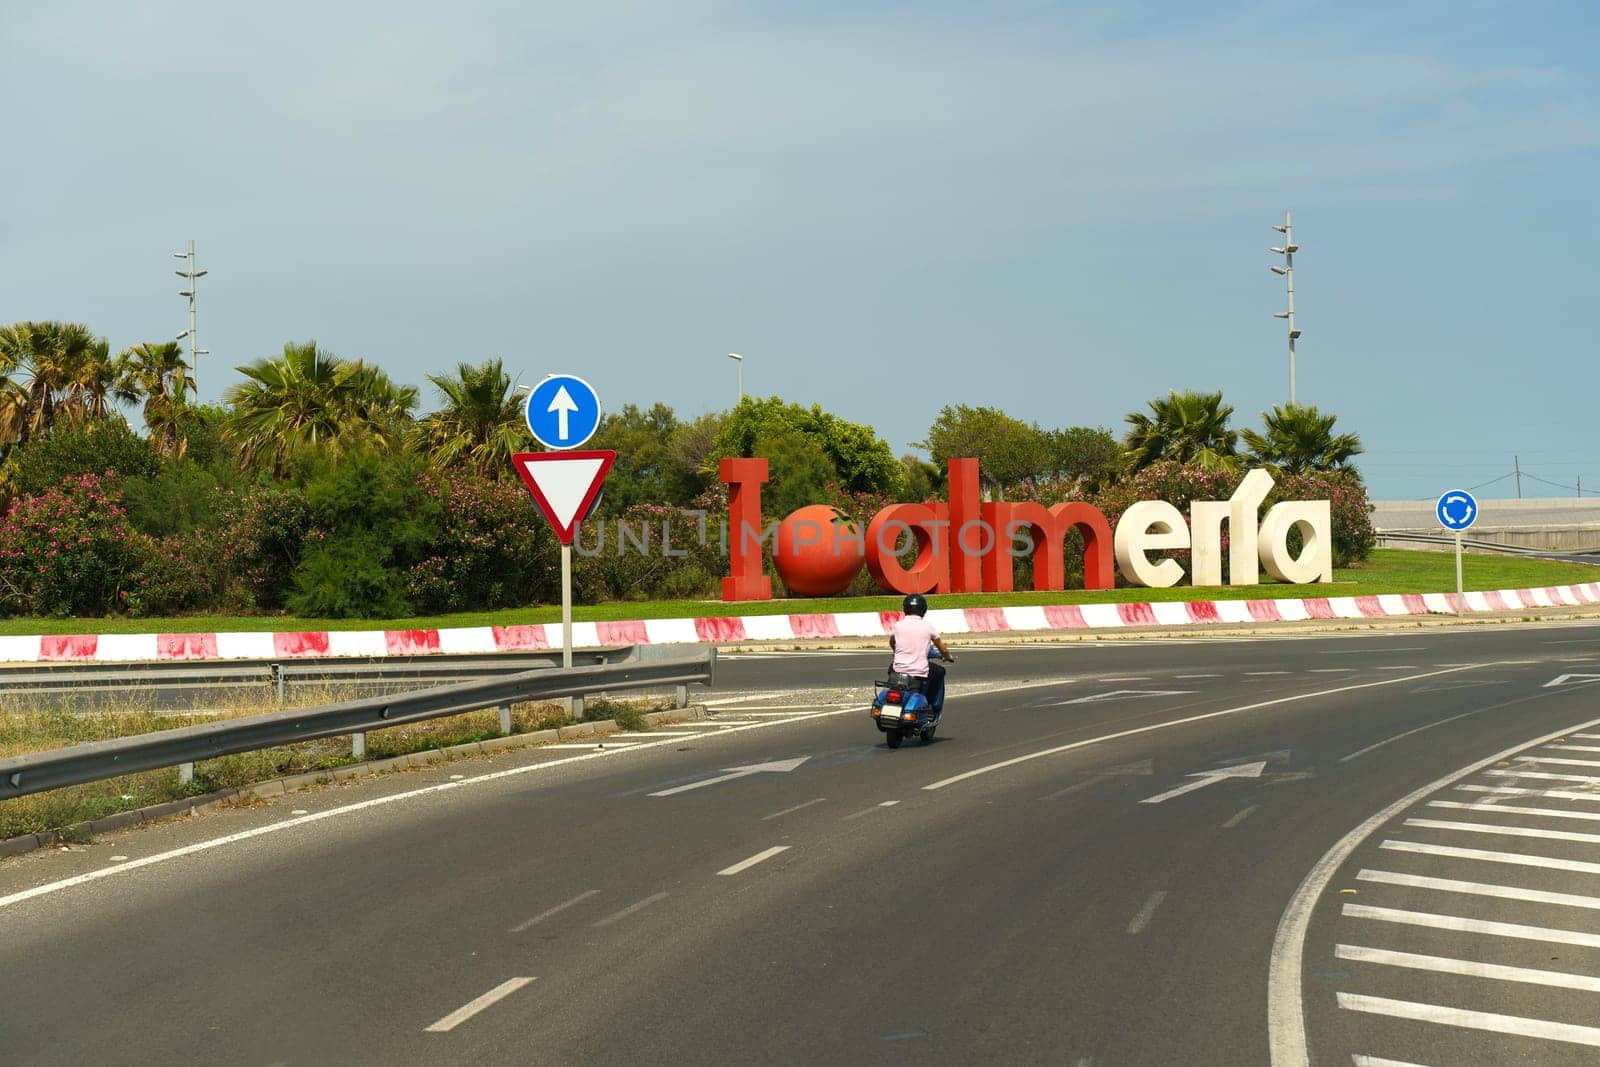 Almeria, Spain - May 25, 2023: A man wearing a helmet is riding a motorcycle down a street lined with buildings, passing by a sign. The scene captures the movement and urban setting.